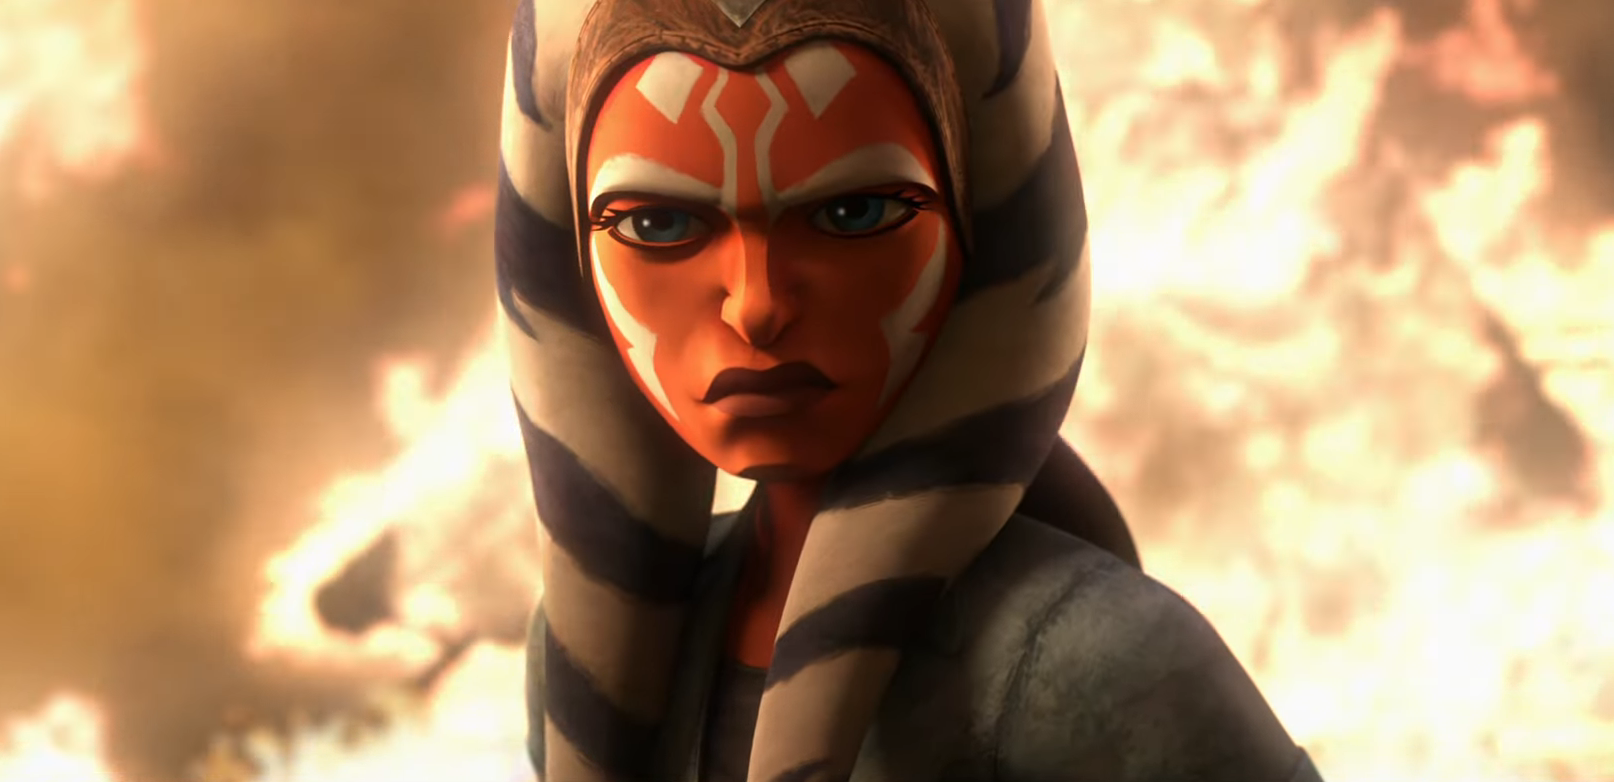 Ahsoka Tano, surrounded by fire and looking fierce, in Tales of the Jedi